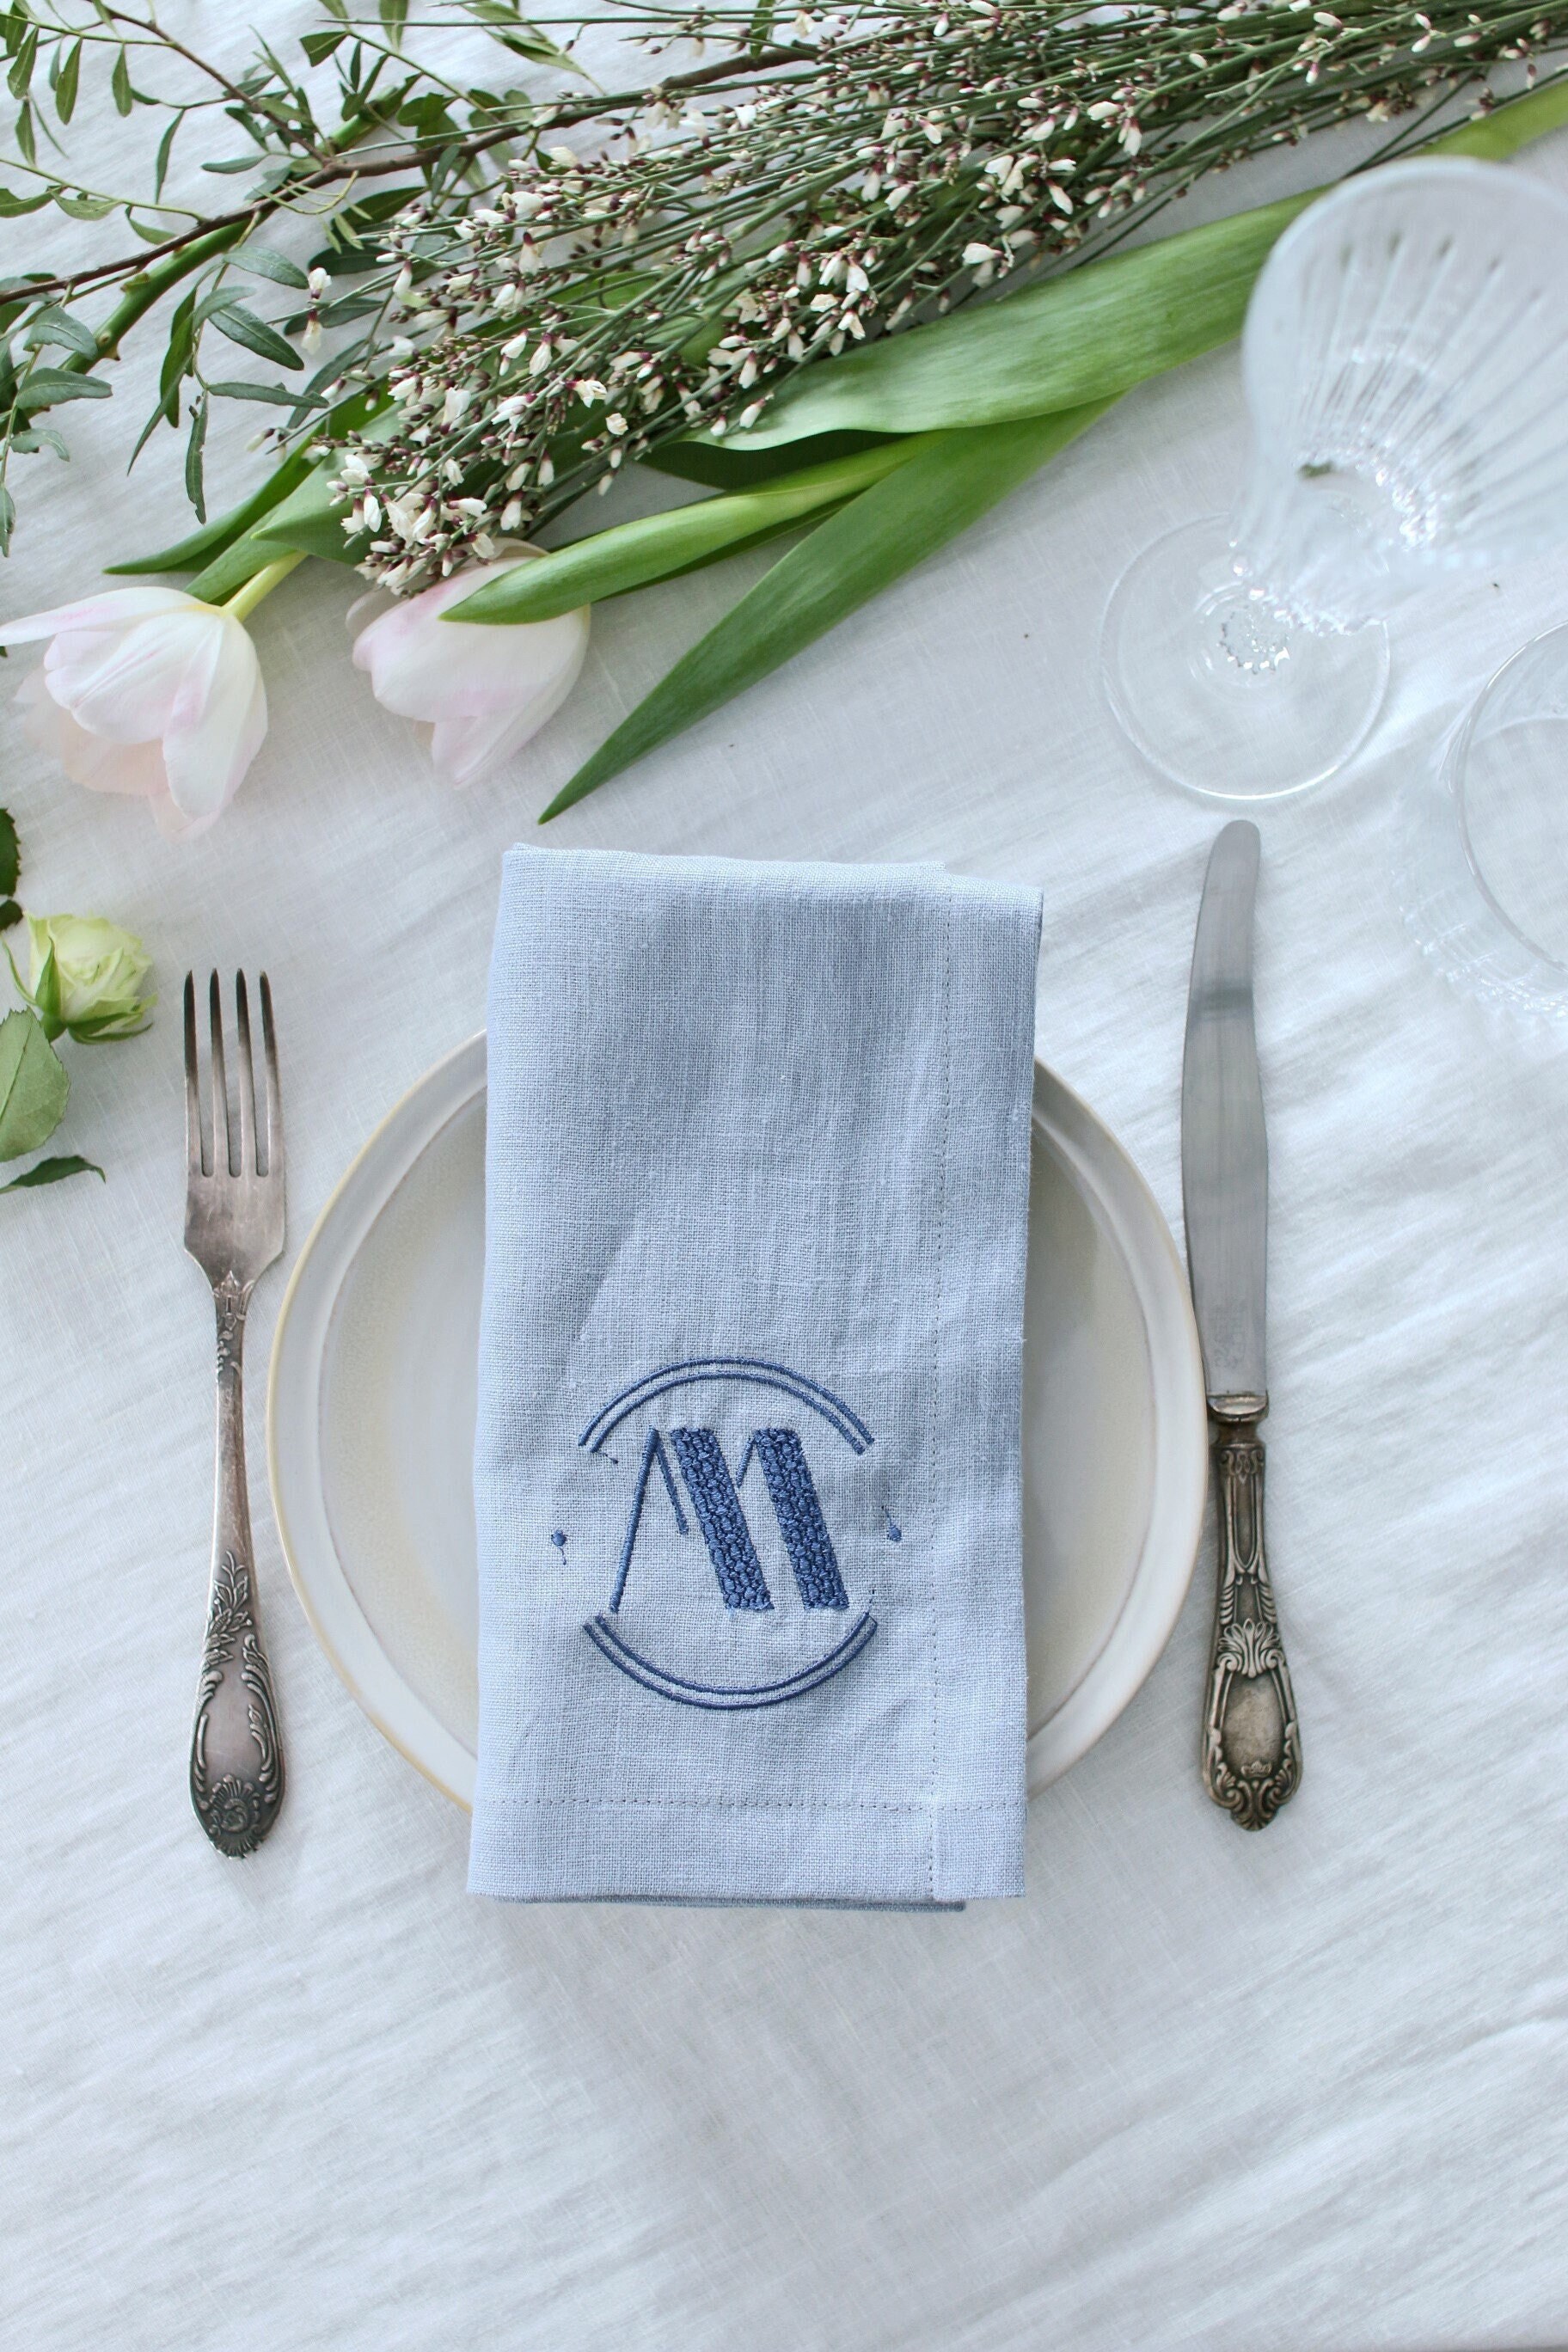 Napkin Personalized Linen Linen Napkin FREE Fast shipment with FedEx MONOGRAMMED Embroidered Napkin Monogrammed Napkin